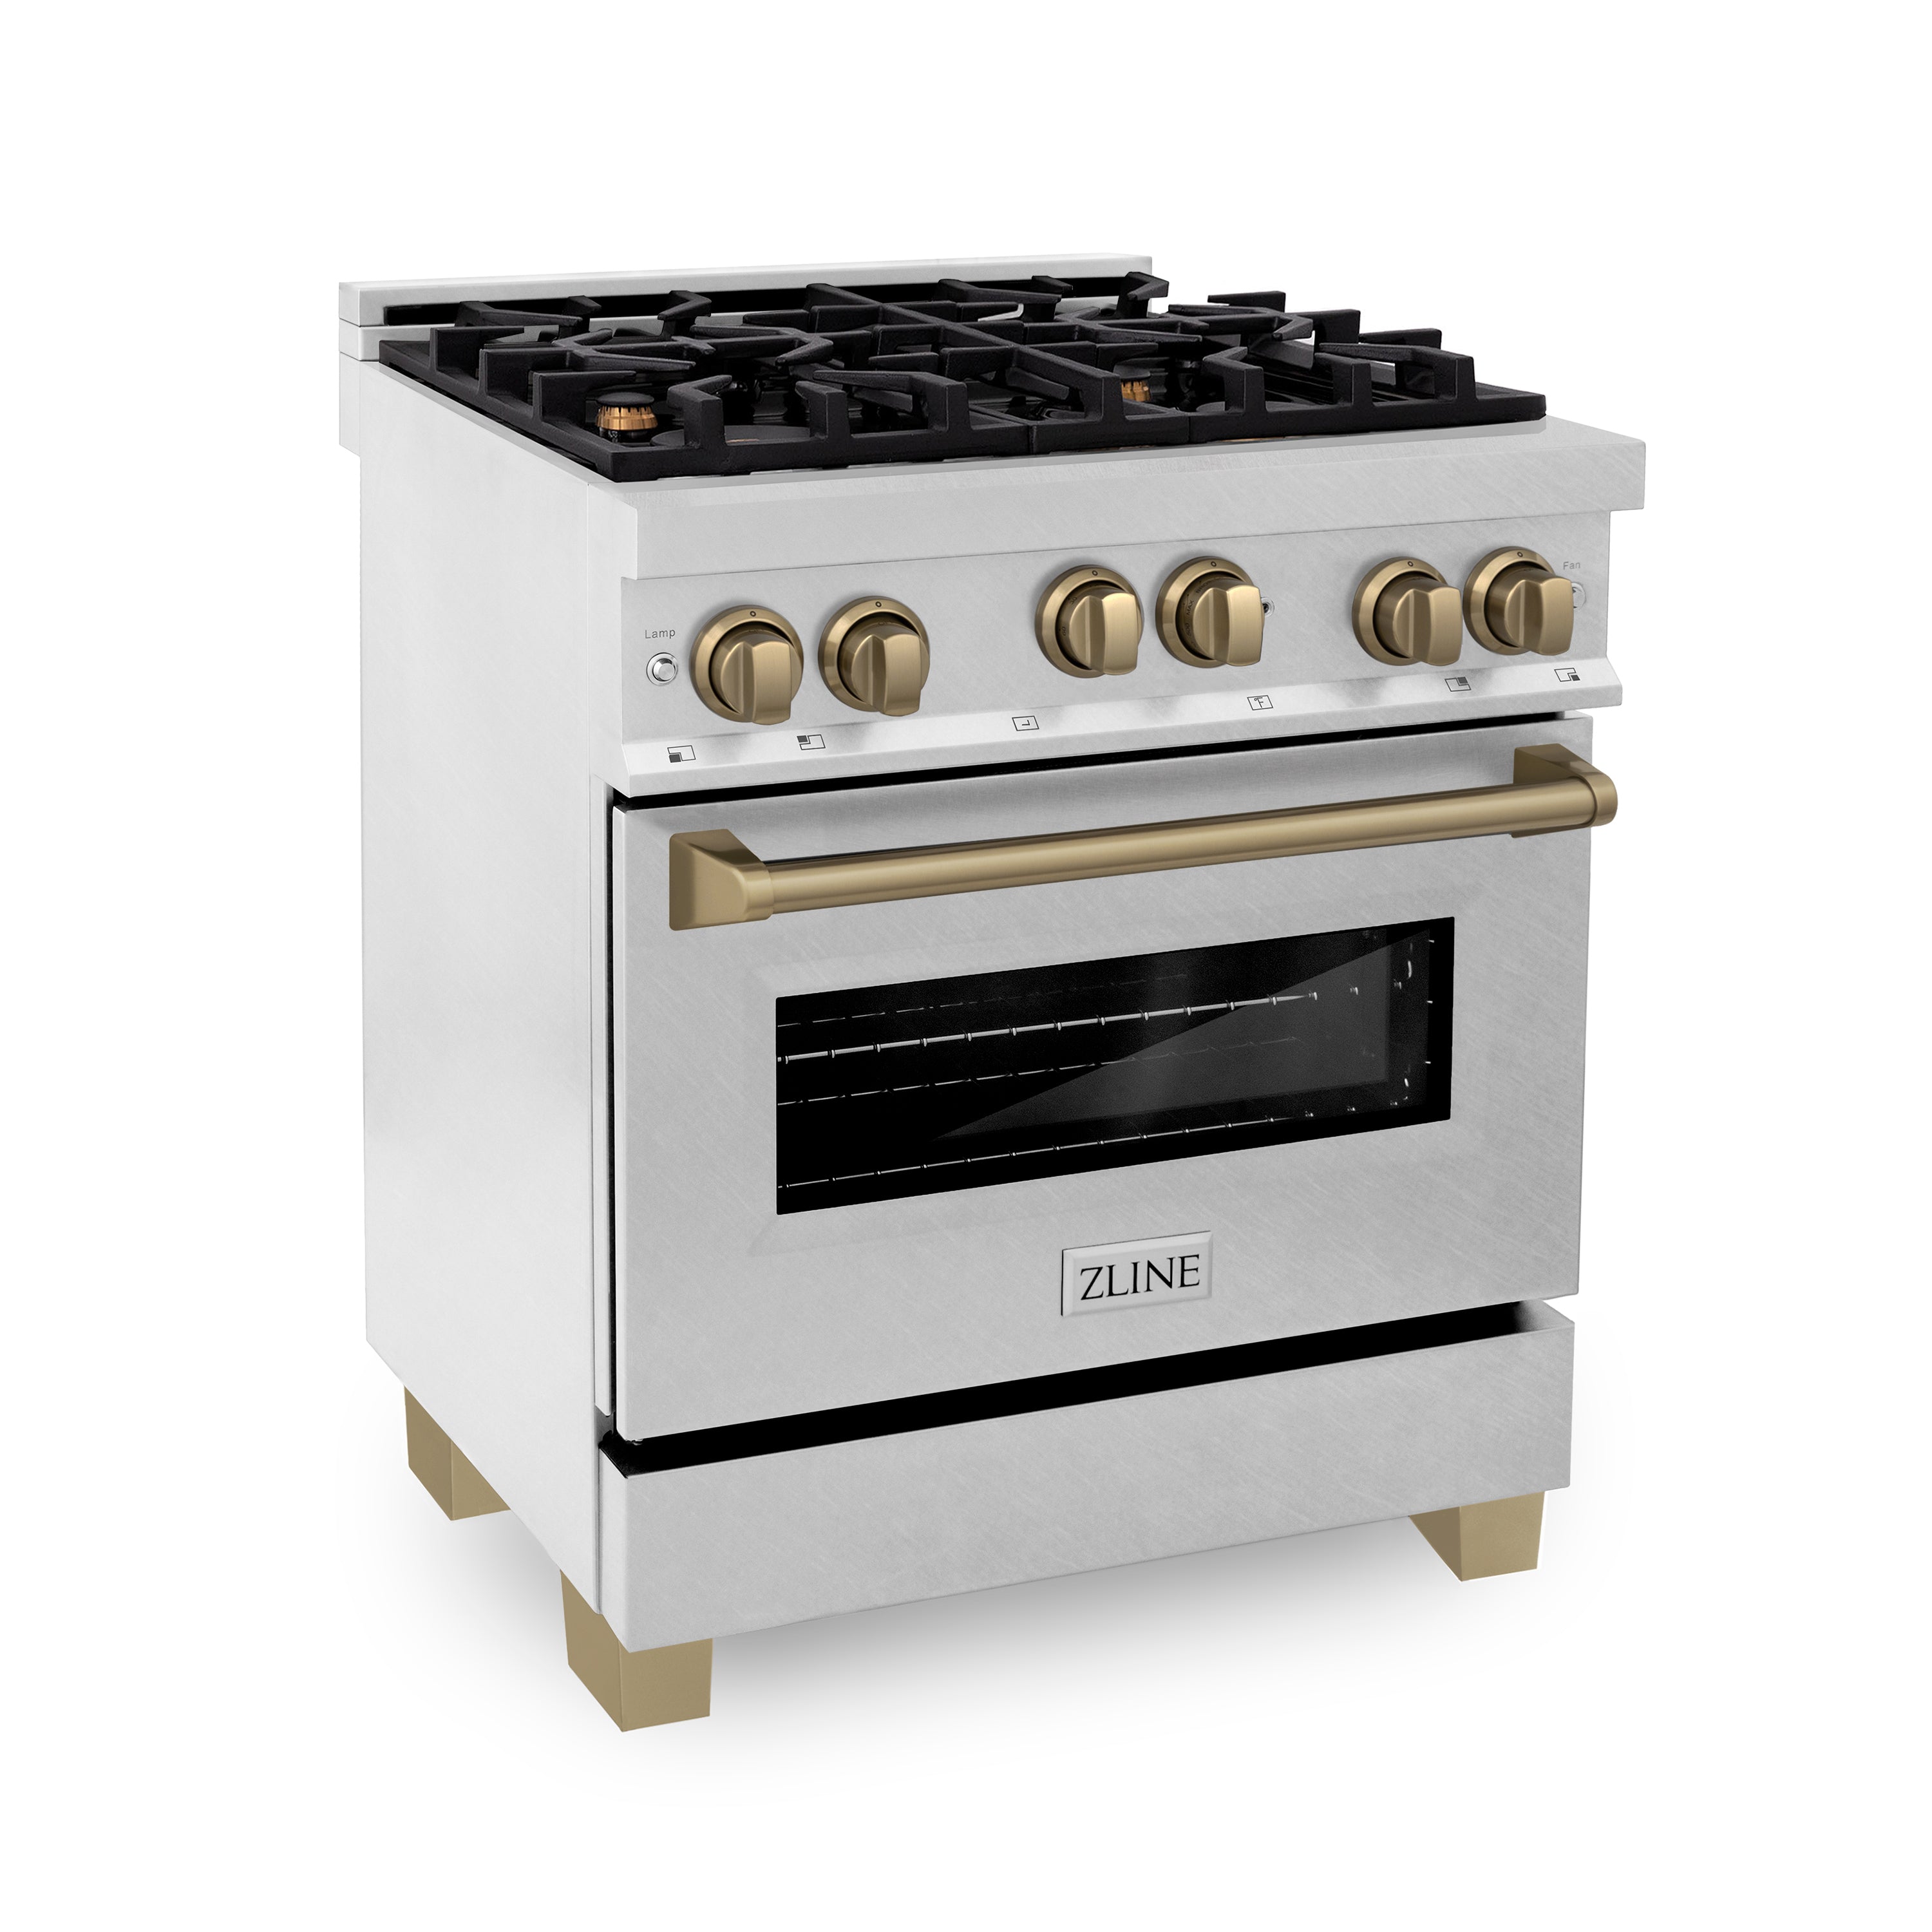 ZLINE Autograph Edition 30 in. 4.0 cu. ft. Range with Gas Stove and Gas Oven in DuraSnow Stainless Steel (RGSZ-SN-30)